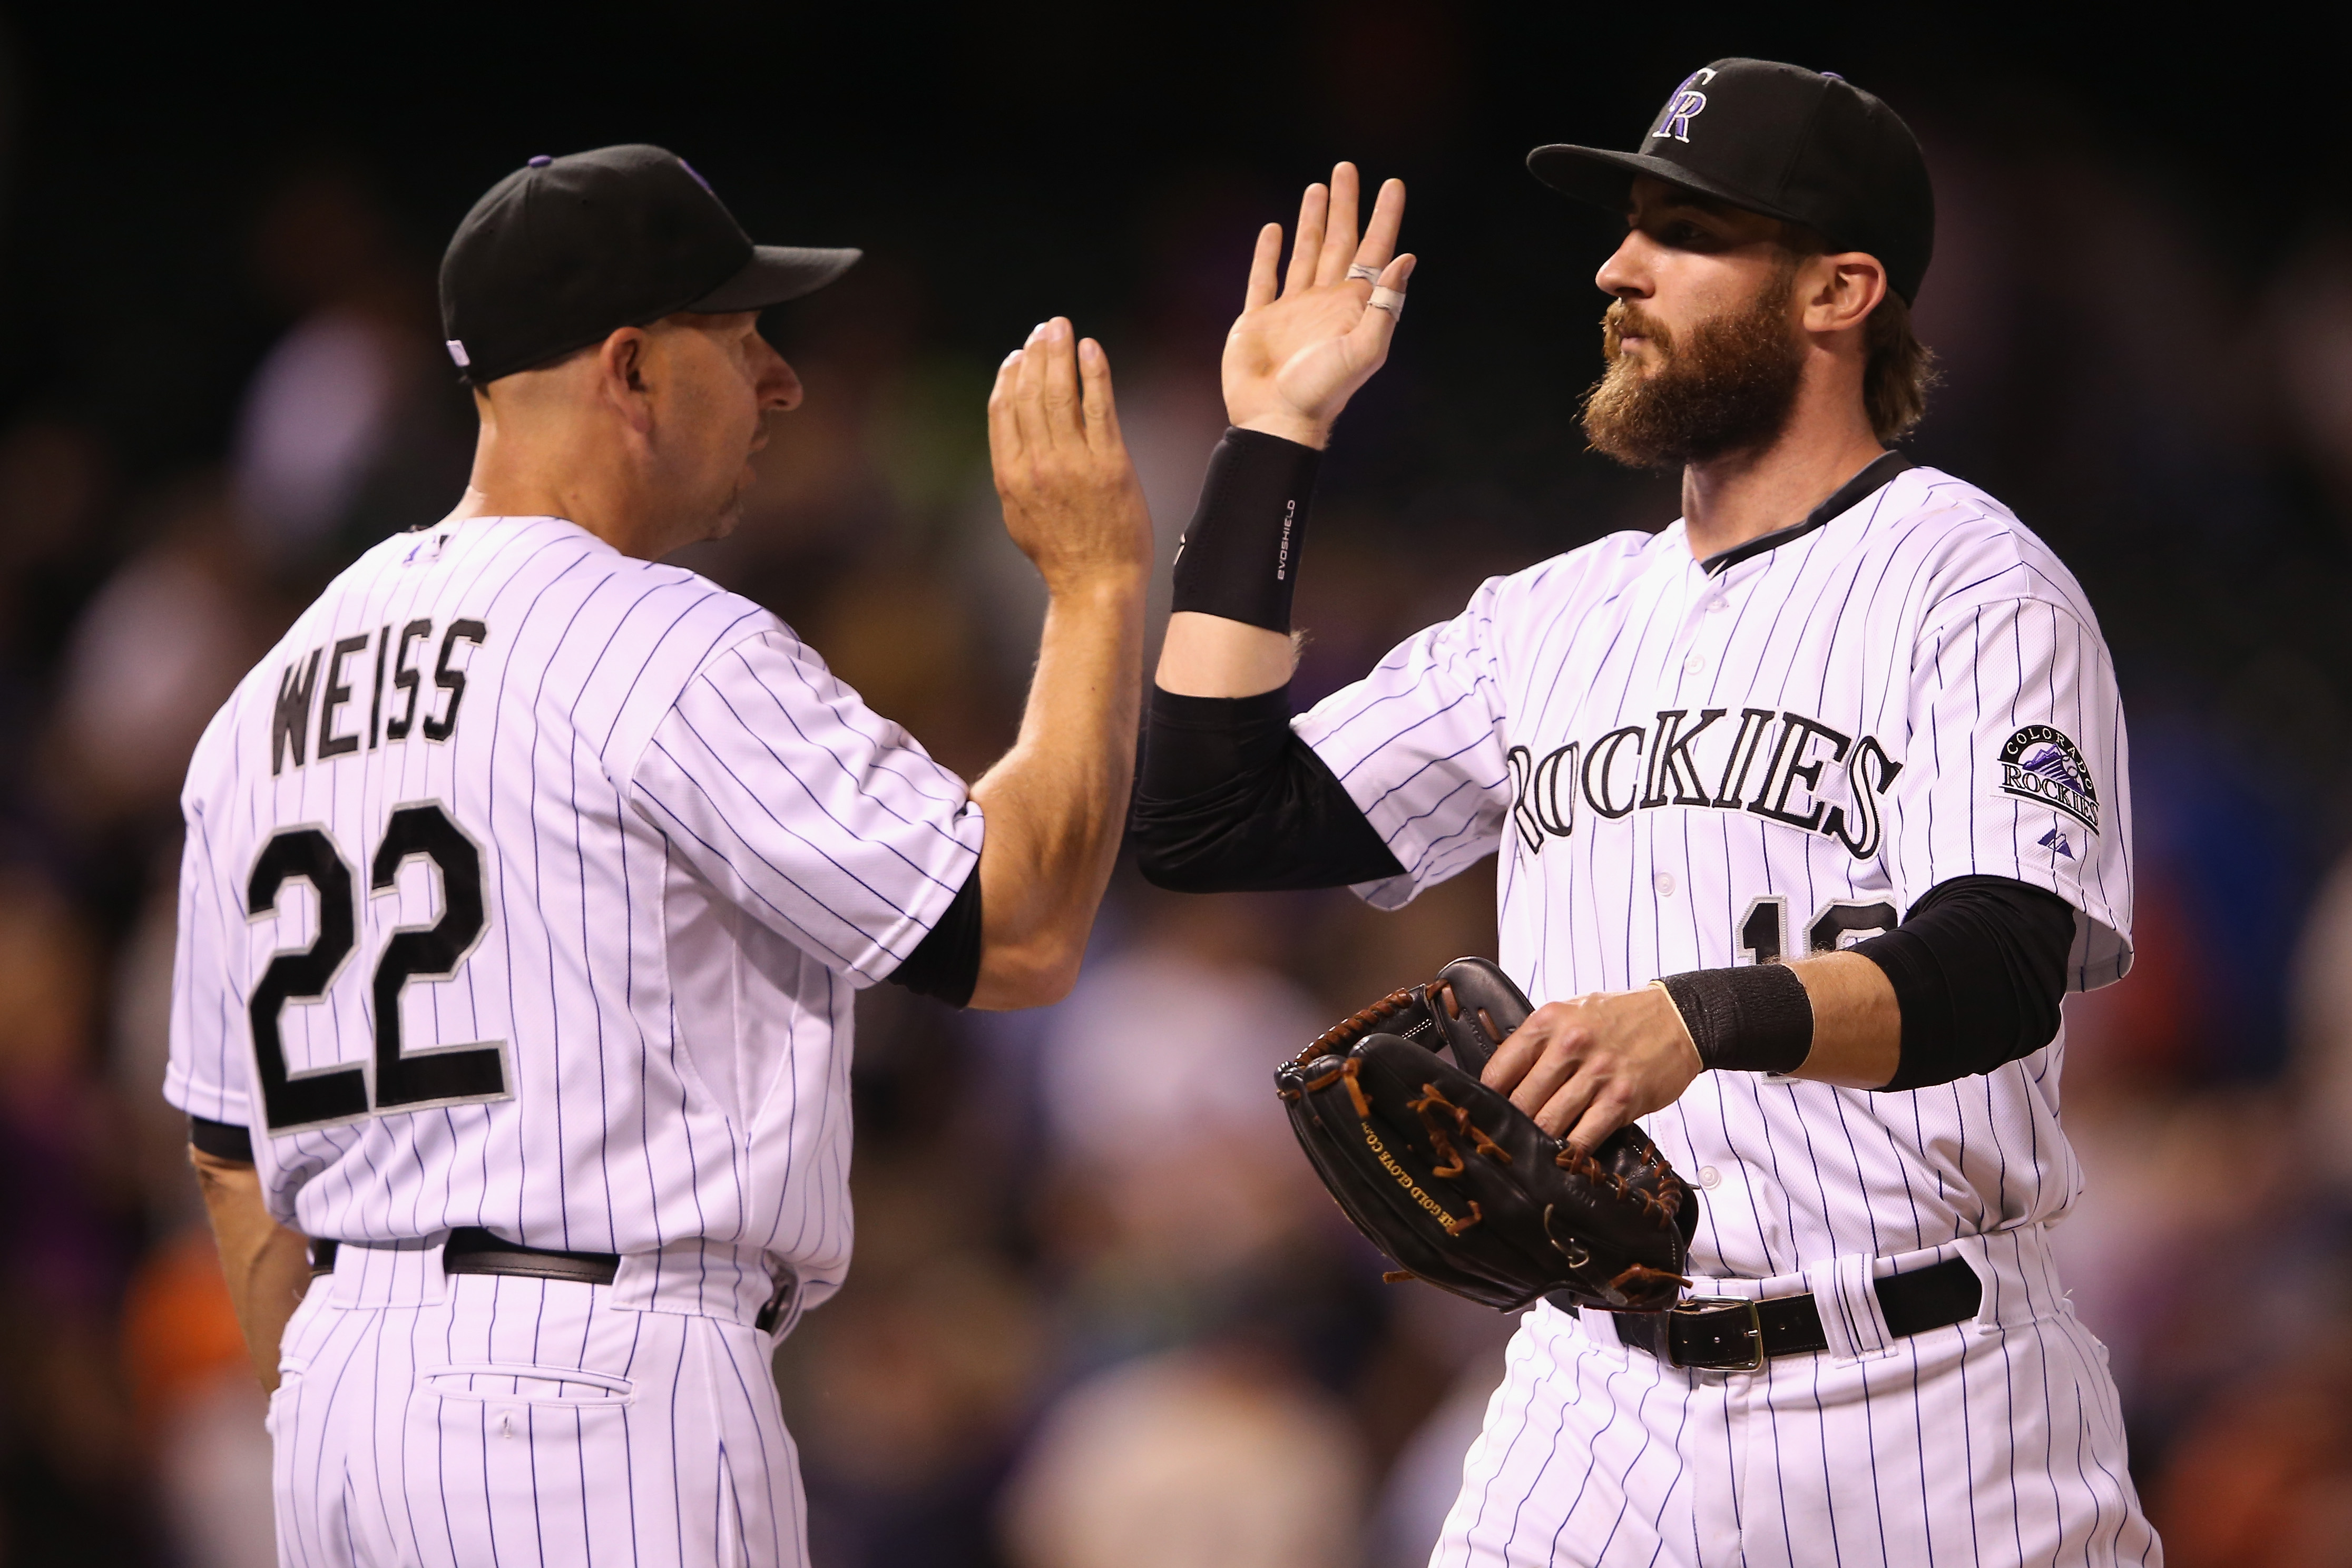 Rockies offensive struggles are merely a 'speed bump